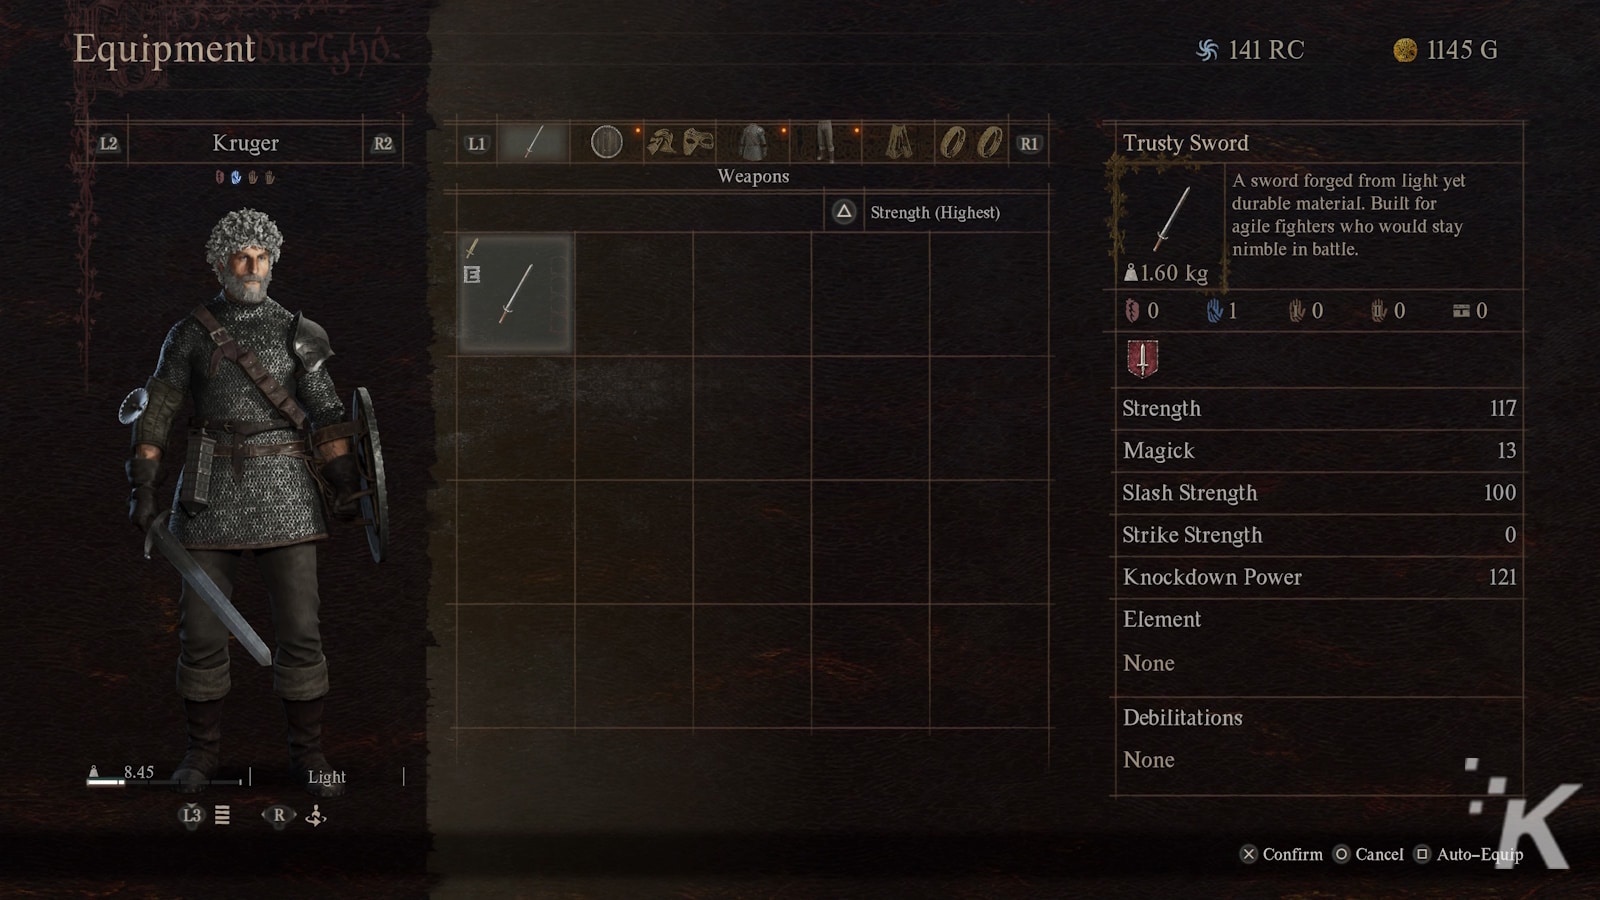 Screenshot of an in-game equipment menu from a role-playing game, featuring a character named "kruger" in medieval armor holding a sword and shield, alongside an inventory interface displaying a selected "trusty sword" with its stats and description.